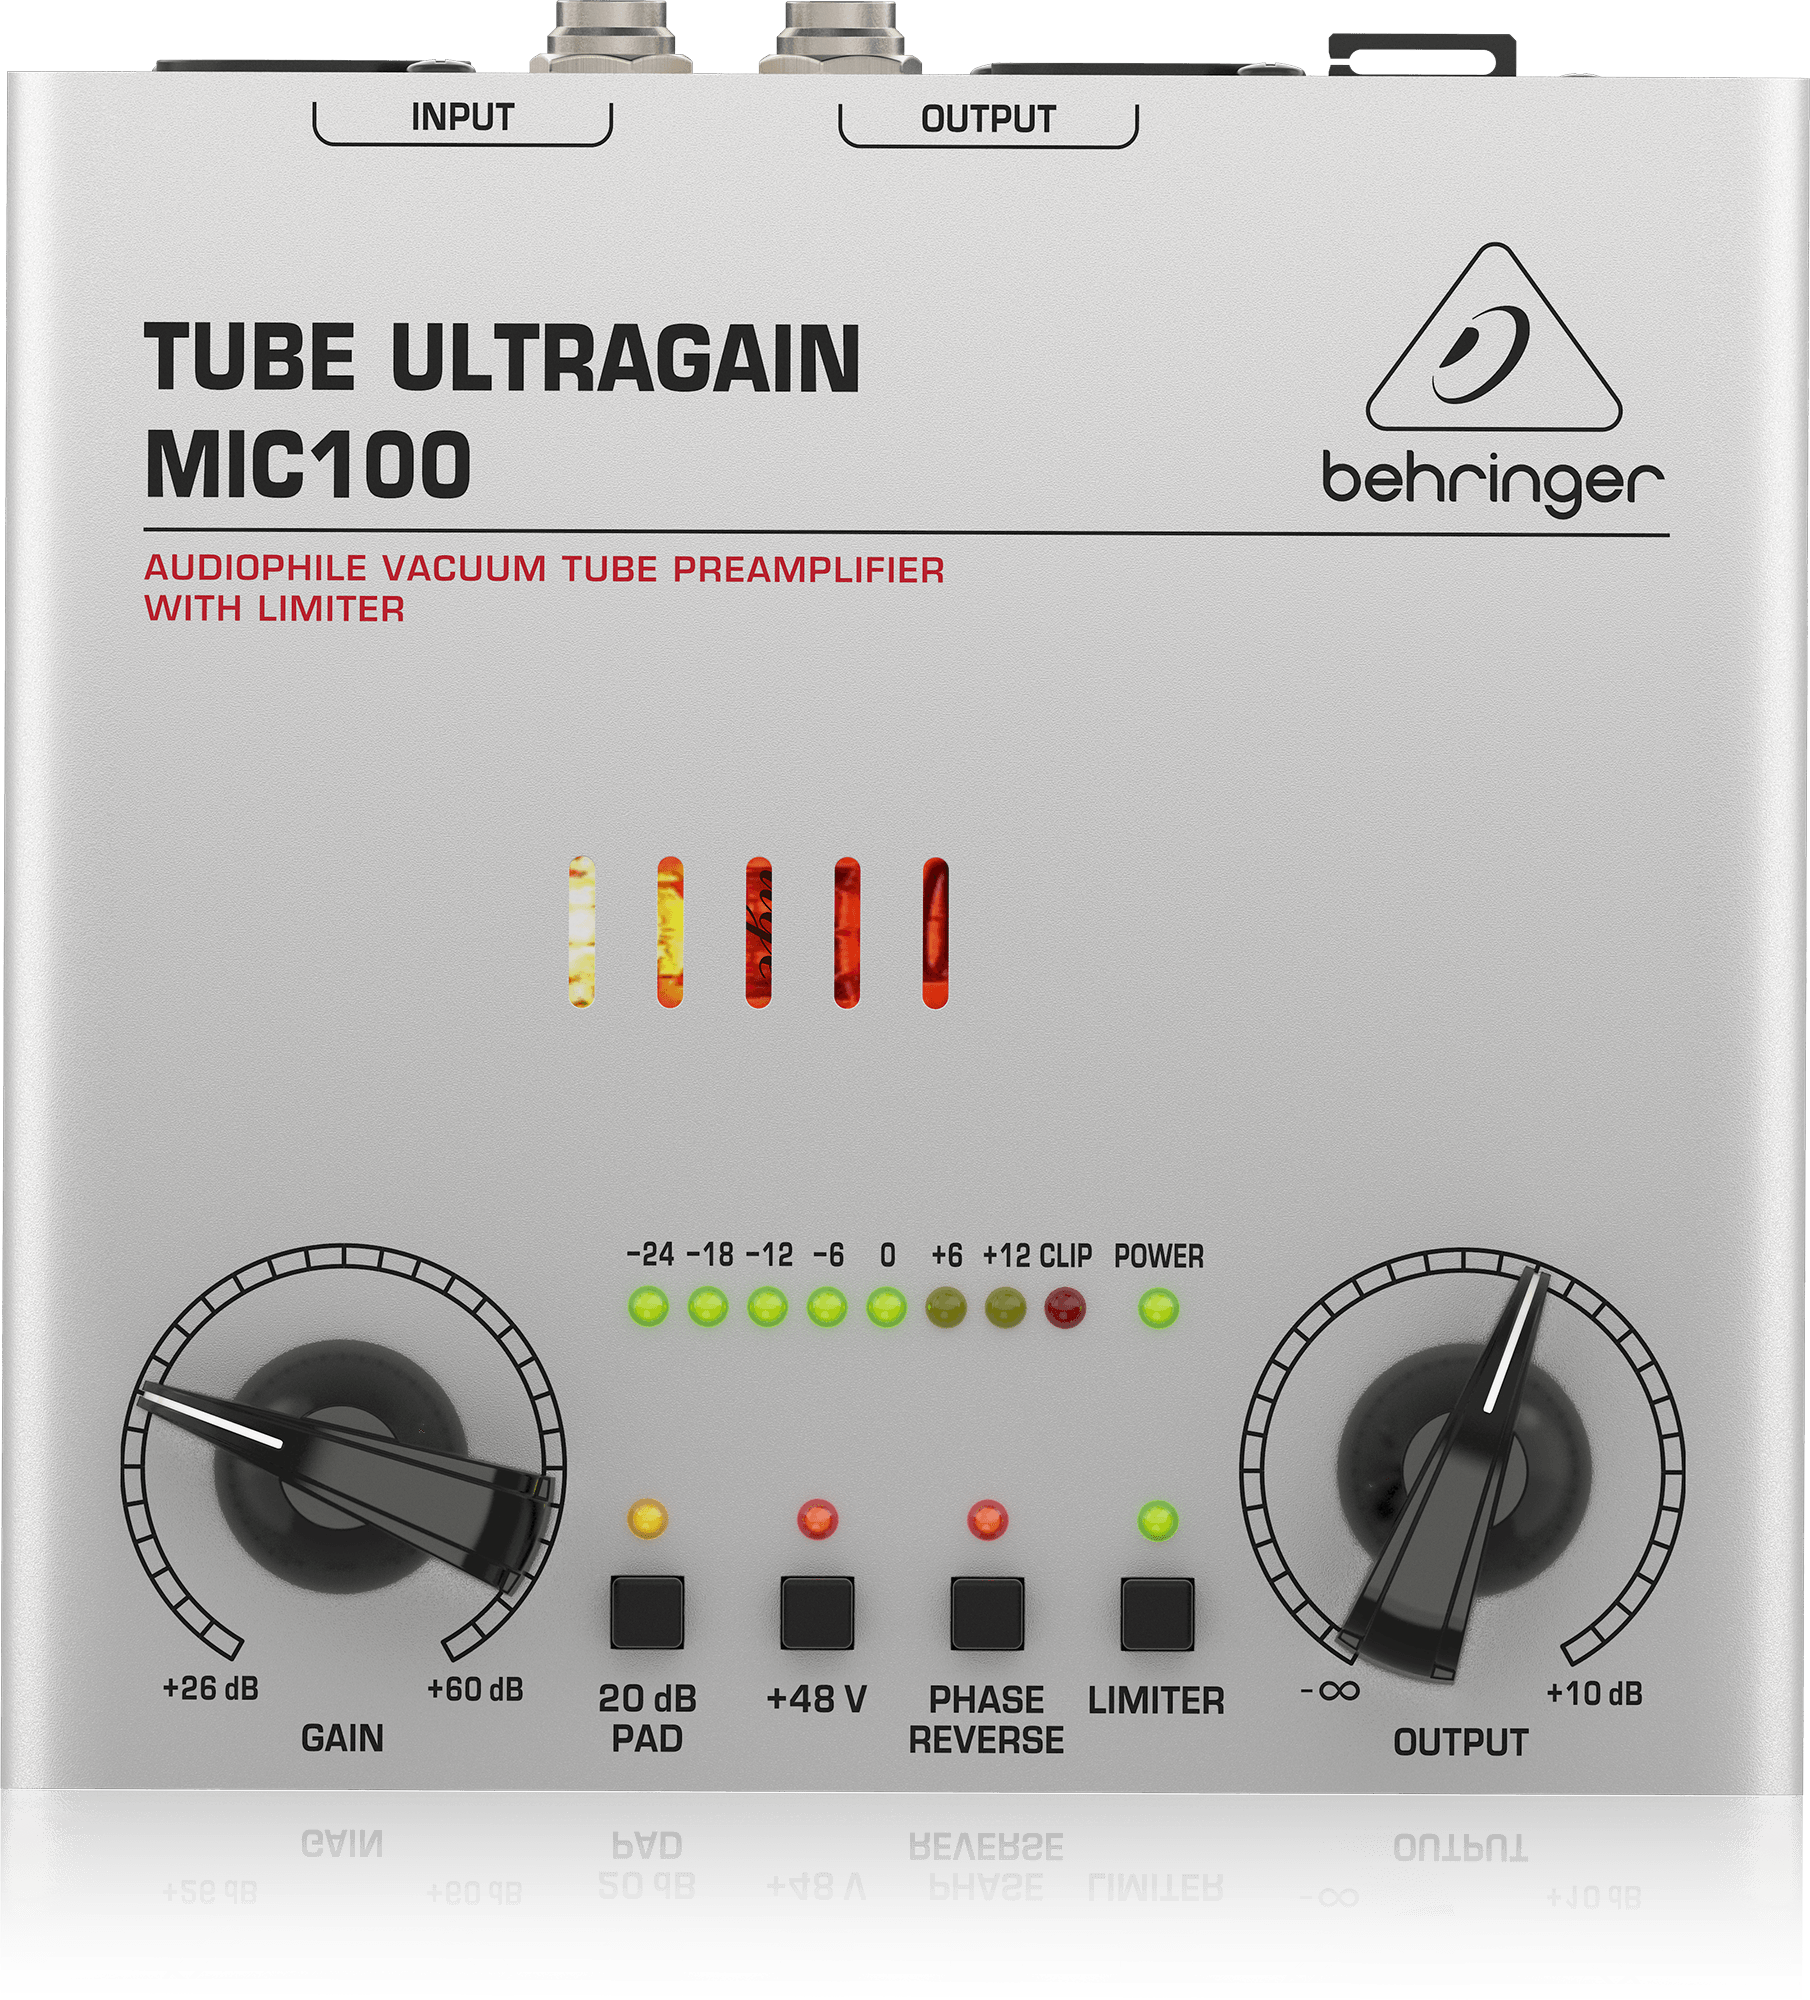 Behringer tube ultragain mic100 audiophile microphone pre-amplifier wpower cord